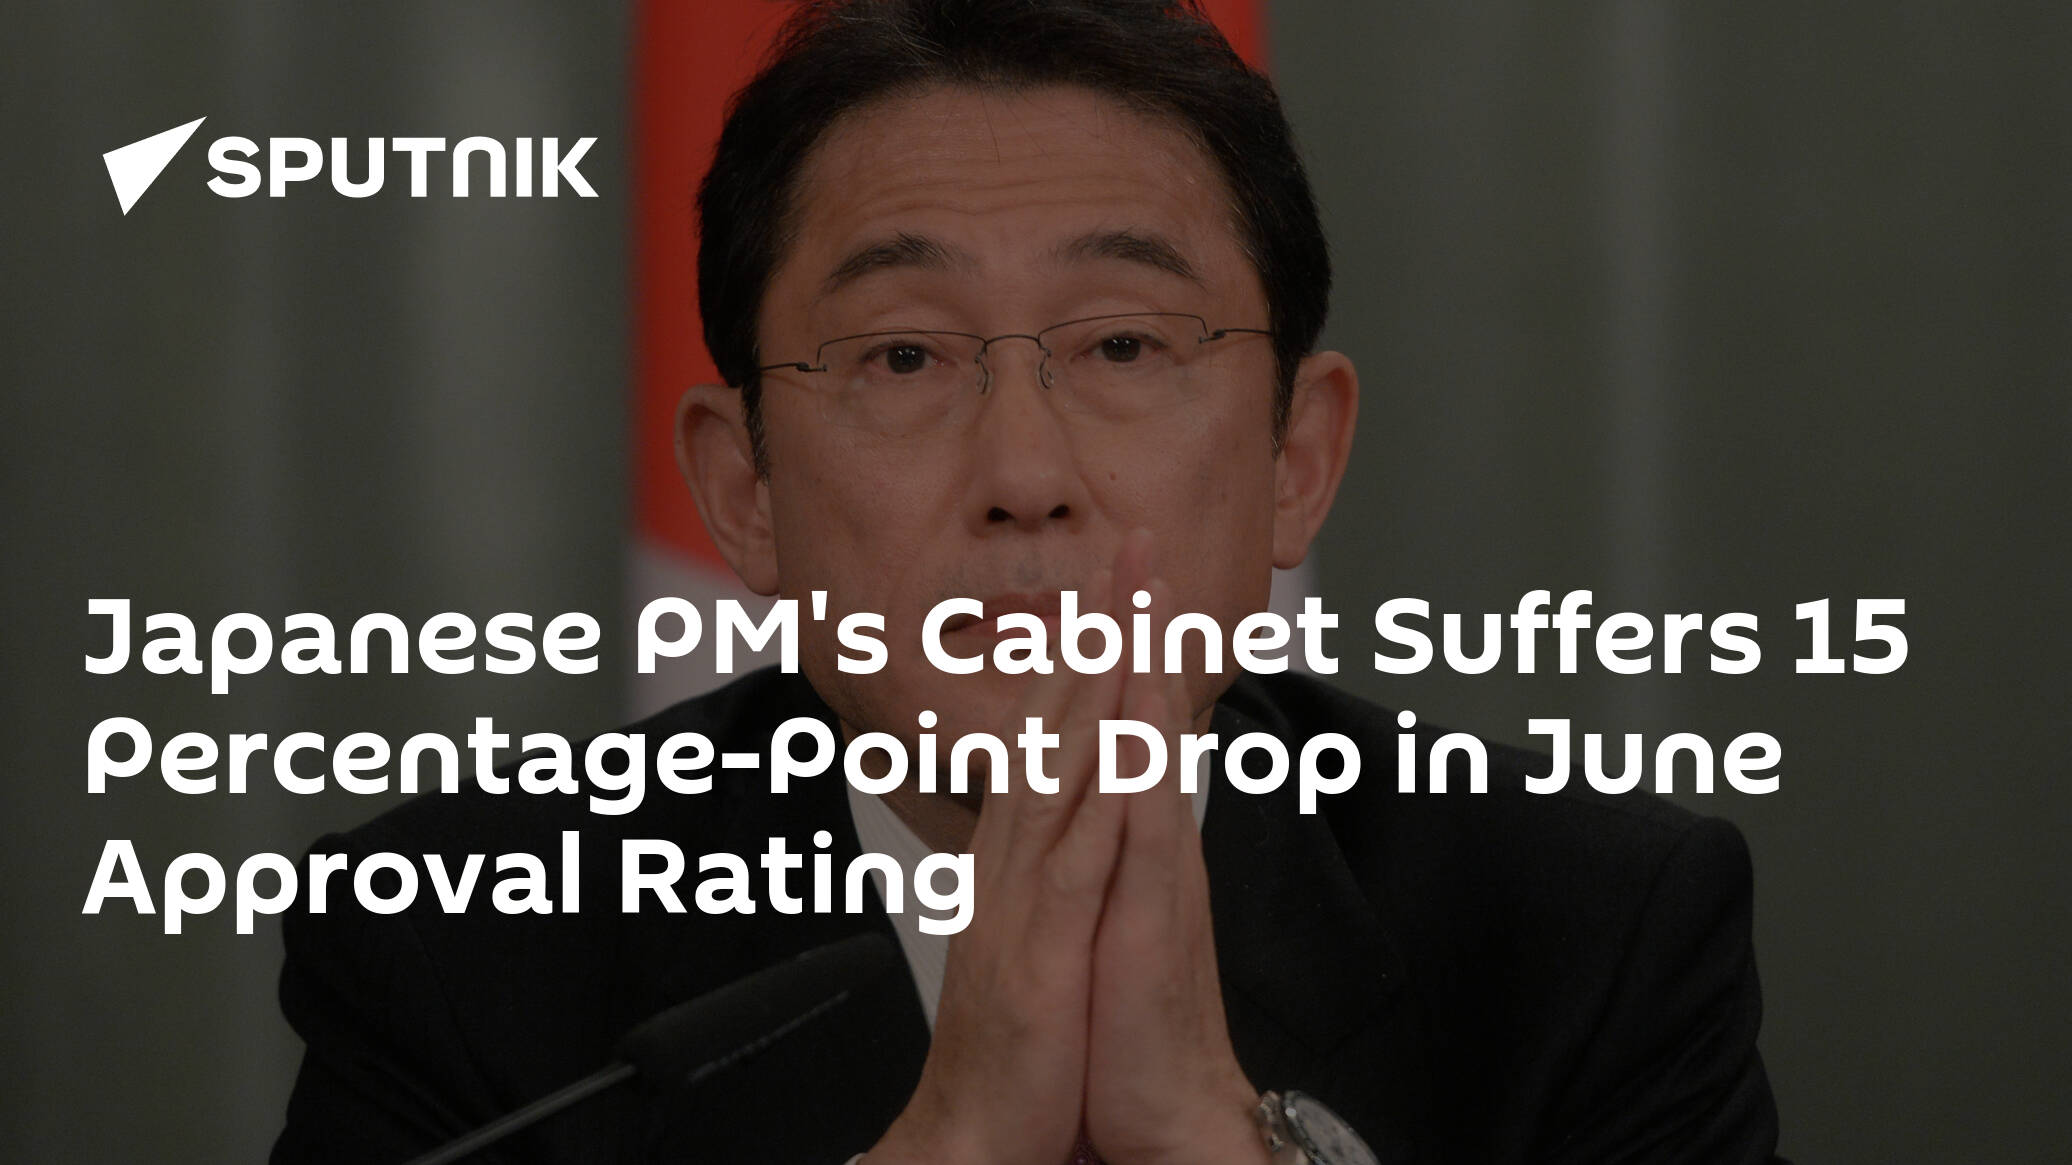 Rating of Japanese Government Drops by 15 Percentage Points in June